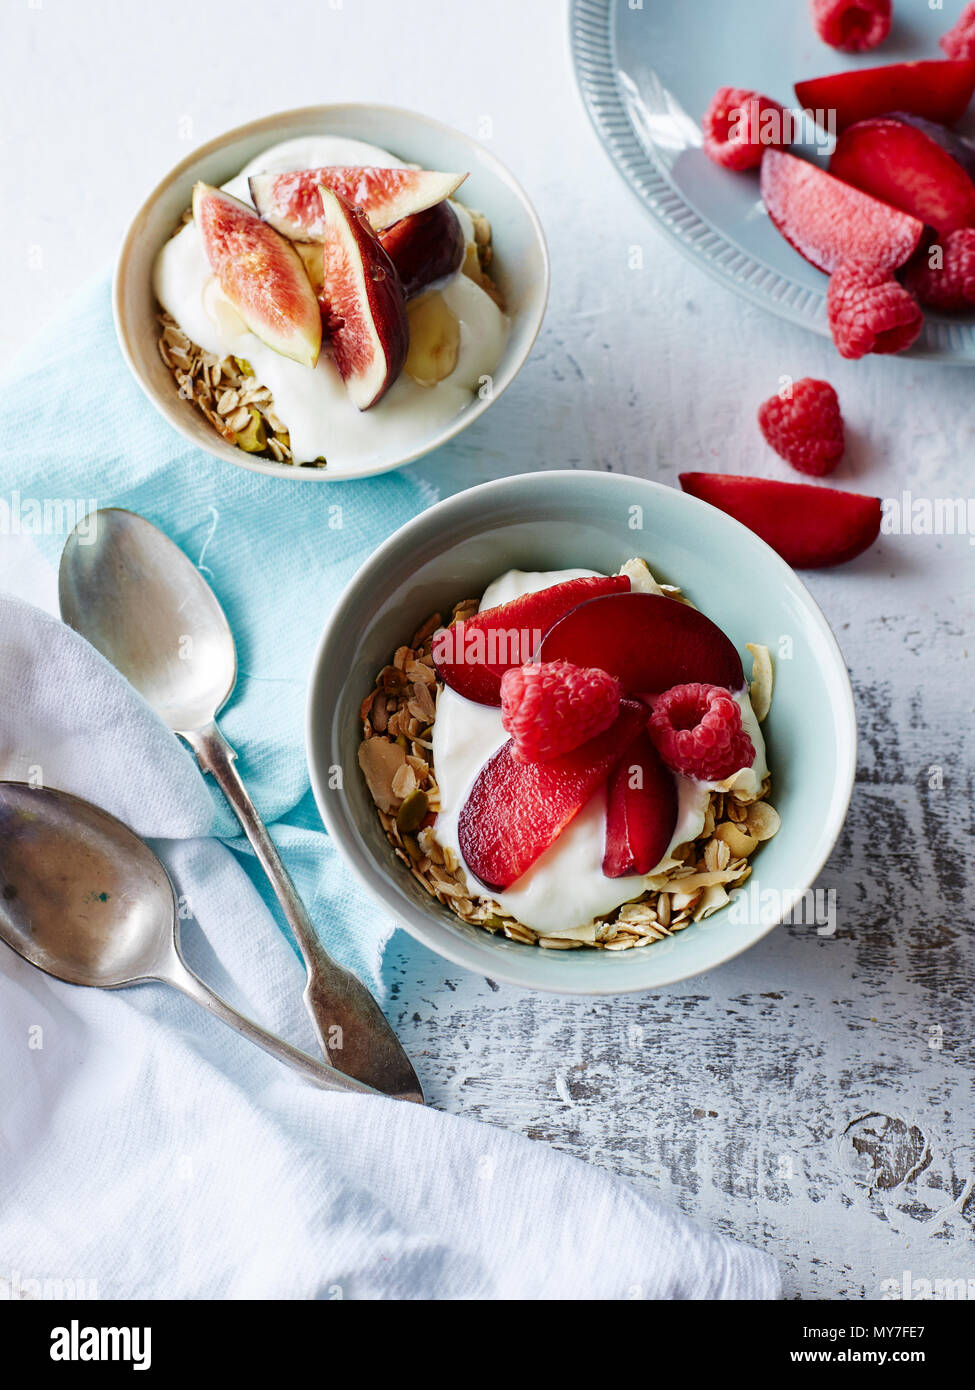 Still life of nut muesli and yogurt in bowls with fresh fruit, overhead view Stock Photo